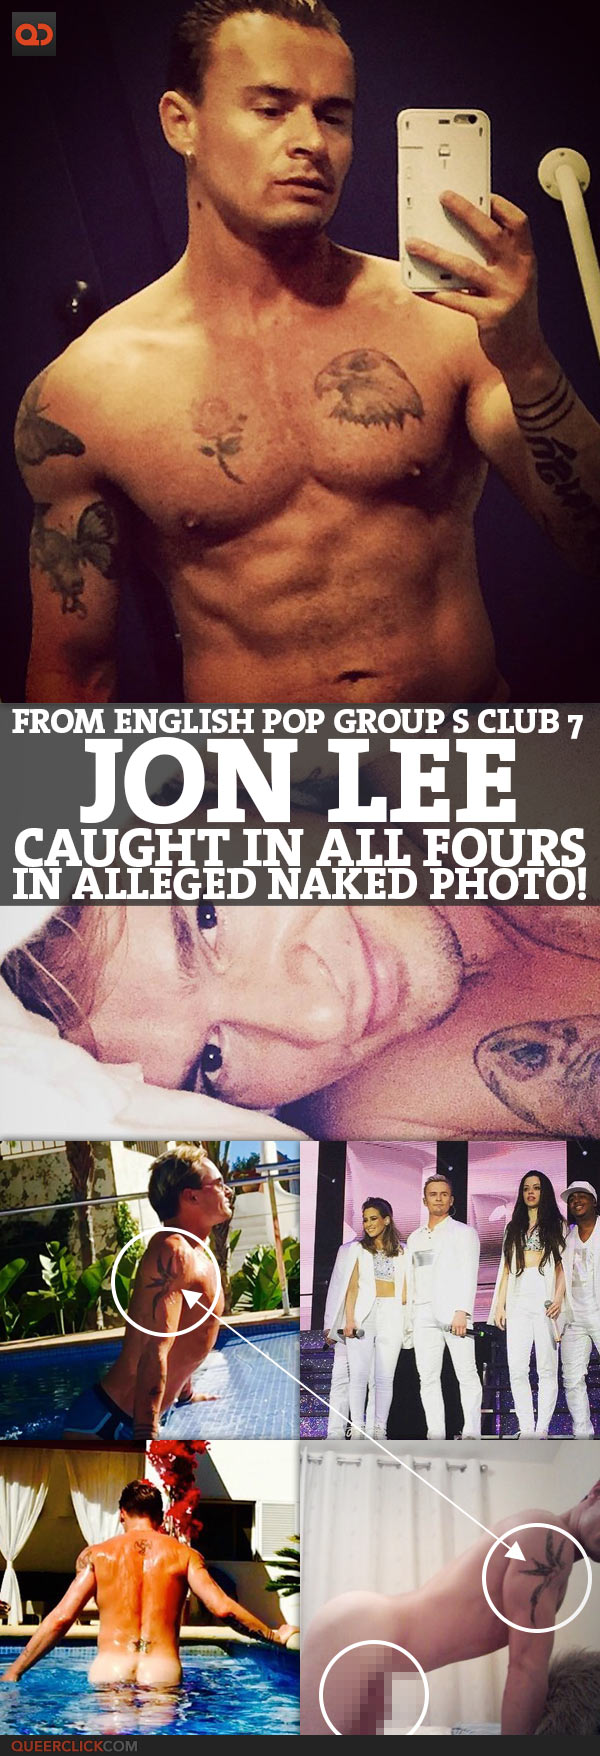 Jon Lee From English Pop Group S Club 7 Caught On All Fours In Alleged Naked Photo Queerclick